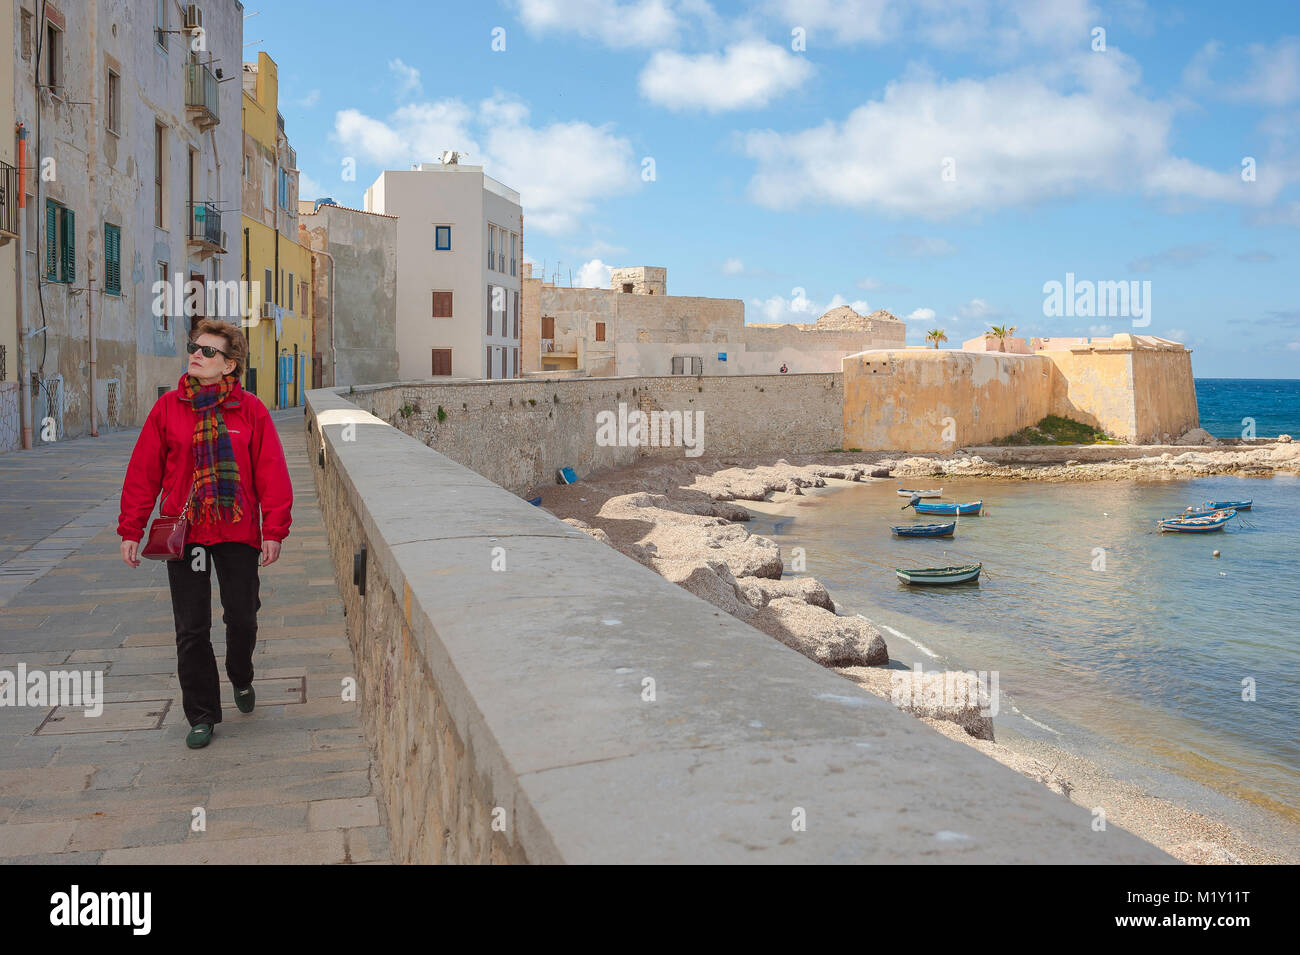 Trapani Sicily sea wall, view of a single mature woman walking along the  sea wall in Trapani harbor, Sicily (MODEL RELEASED Stock Photo - Alamy